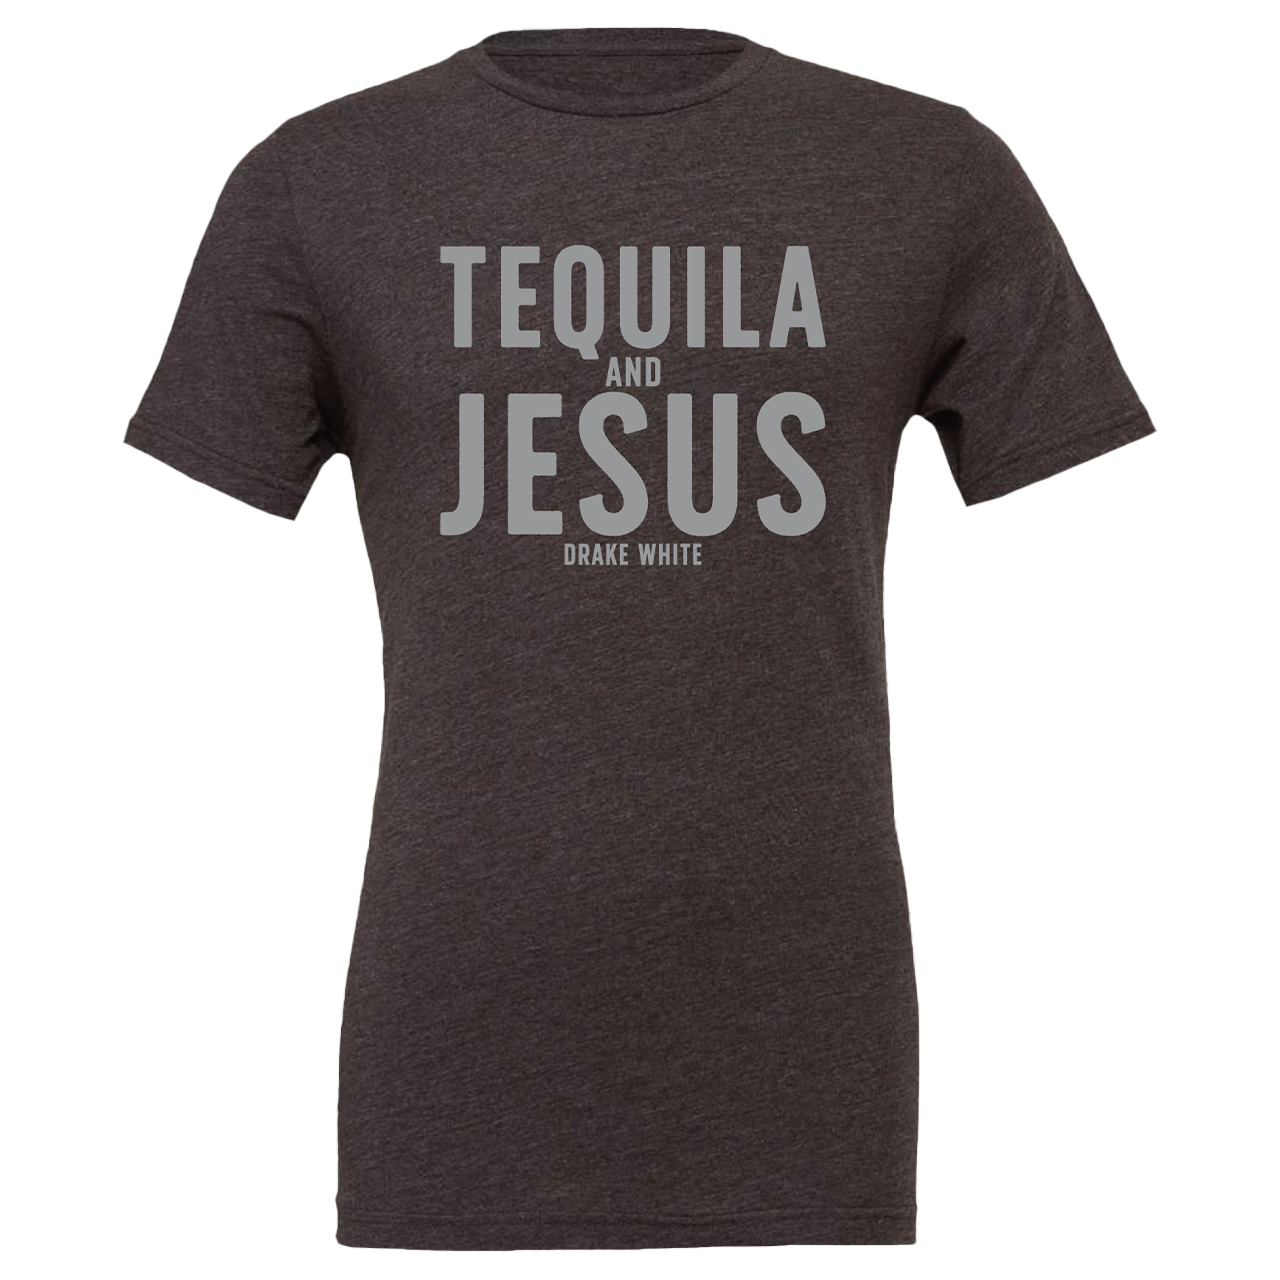 Tequila And Jesus Tee